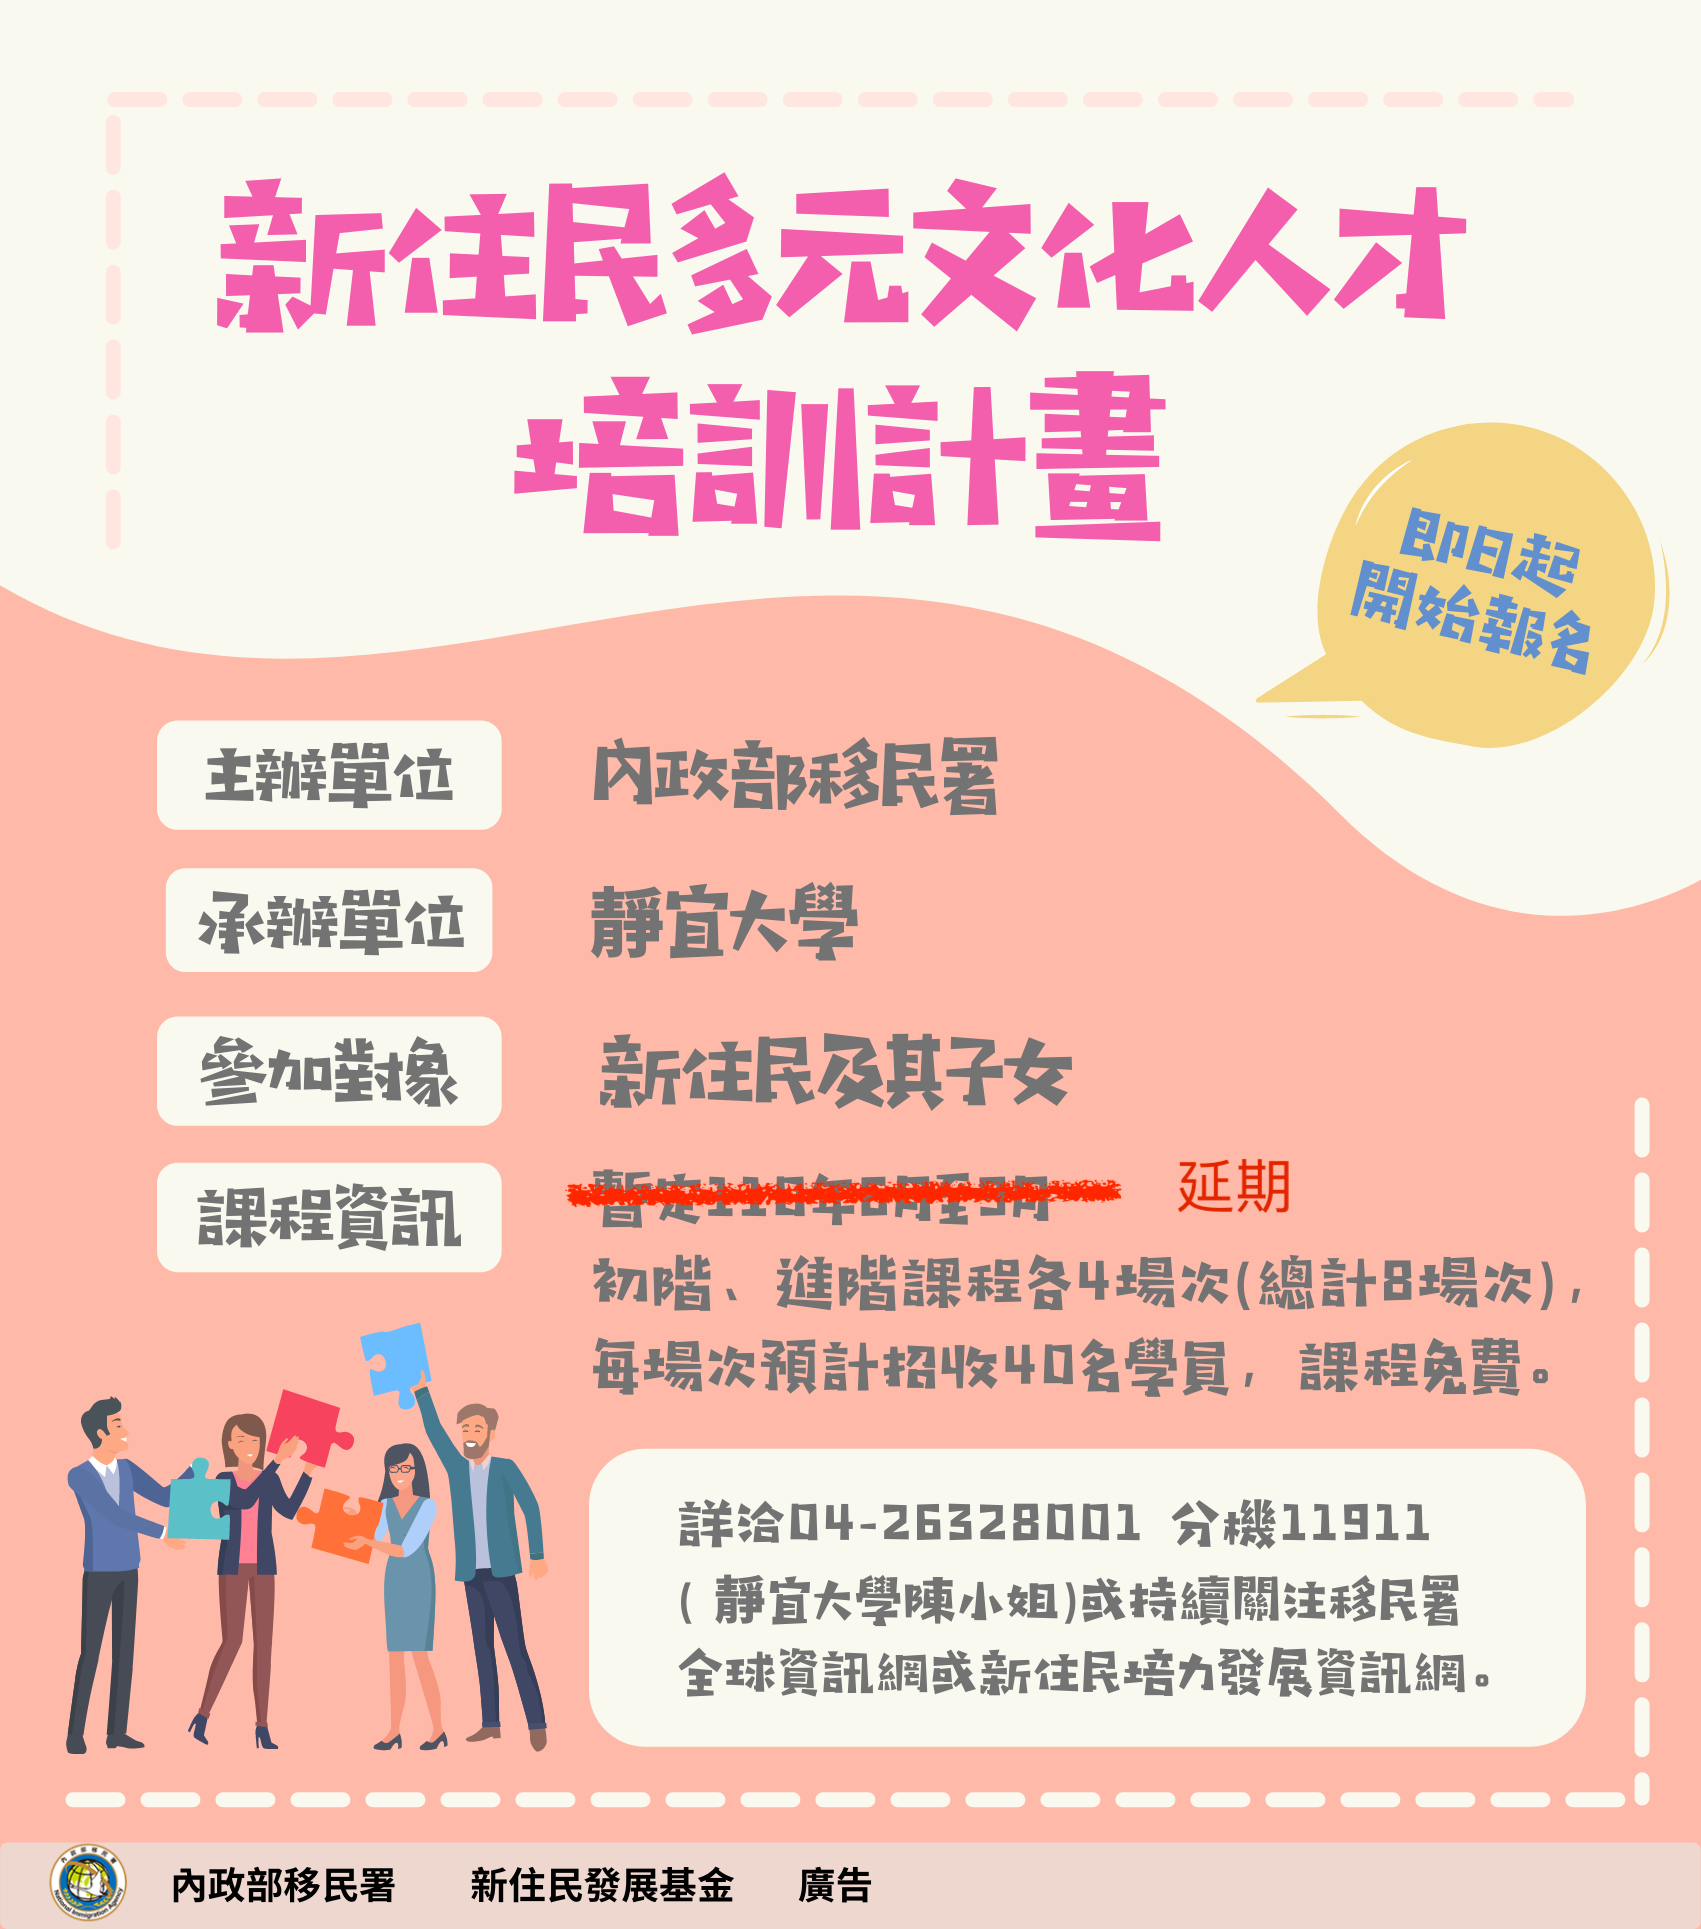 As Taiwan enters the community transmission stage of COVID-19, the New Immigrant Multicultural Talent Training Program is postponed. Image courtesy of NIA. 